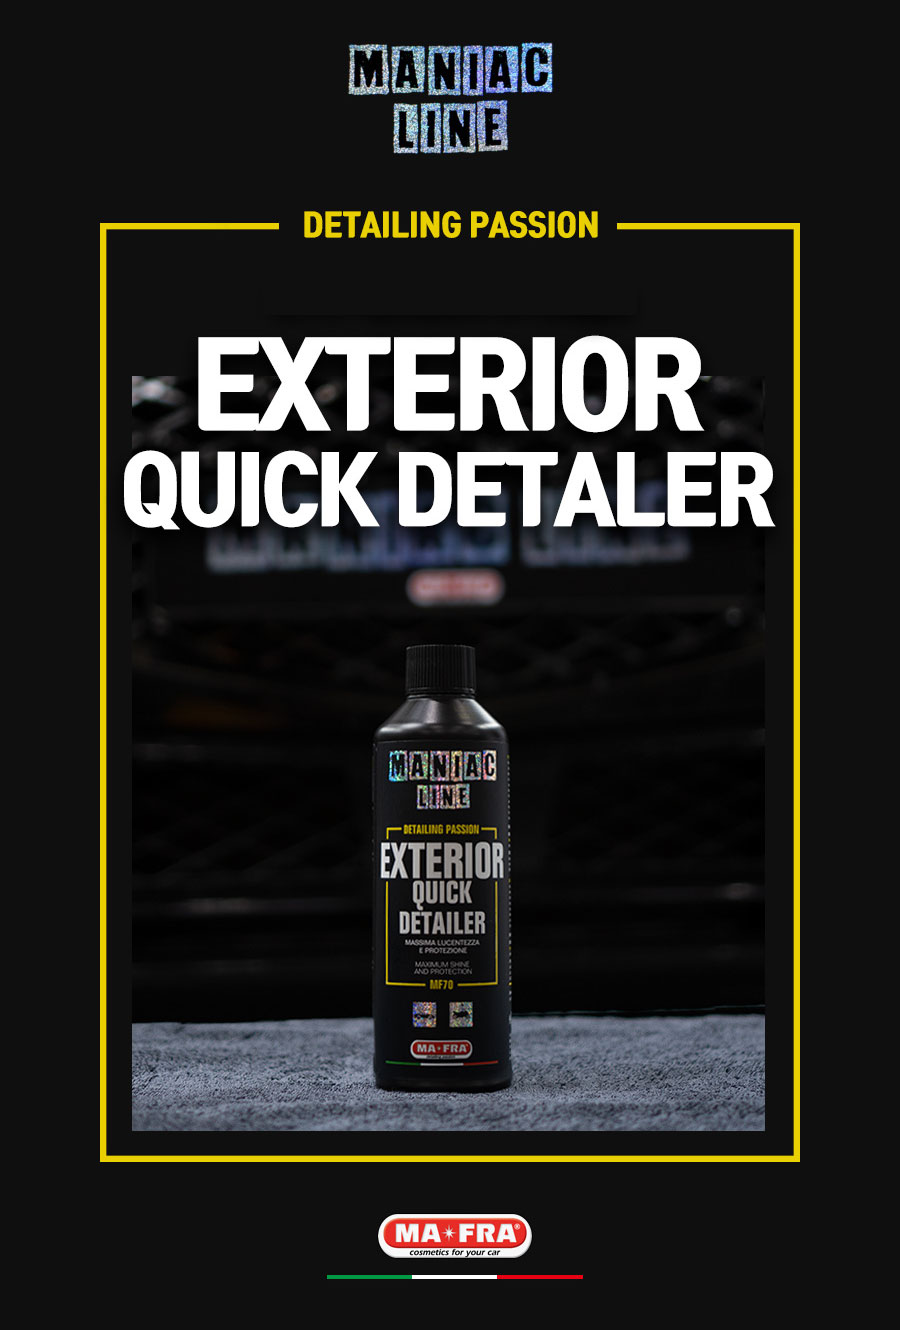 Mafra Maniac Line Exterior Quick Detailer 500ml (Dry Wet Clean Polish Protect car exterior Compatible Safe on Ceramic Coating Nano Coating Wax) - Maniac Line Official Store Singapore